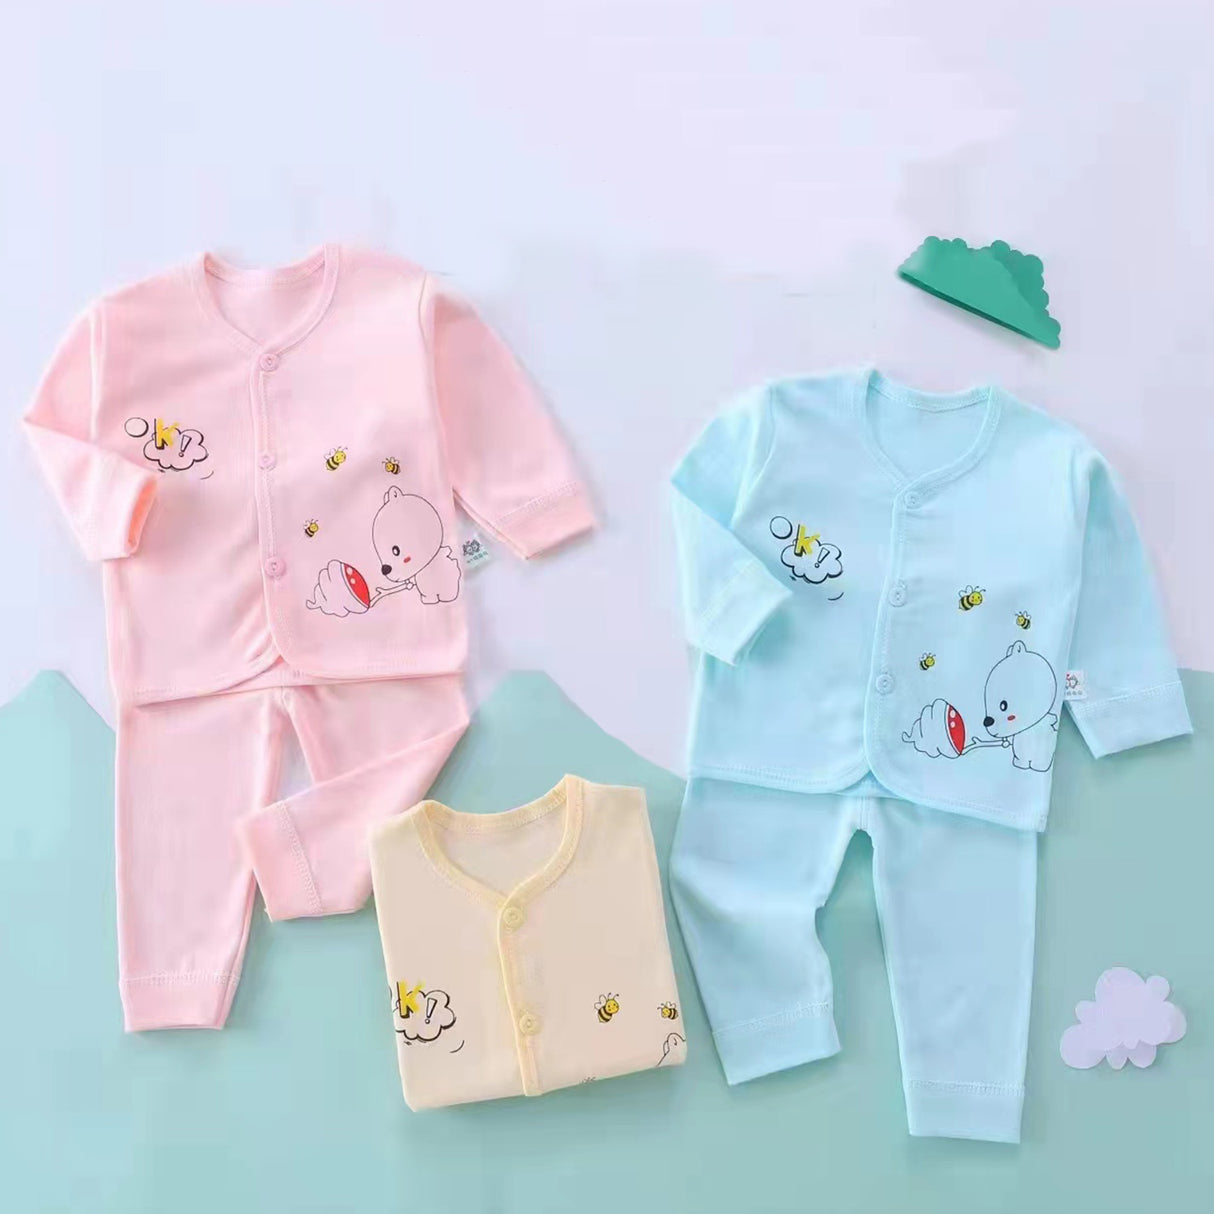 Honey Bear Full Sleeves Top And Pyjama Buttoned Cotton Night Suit